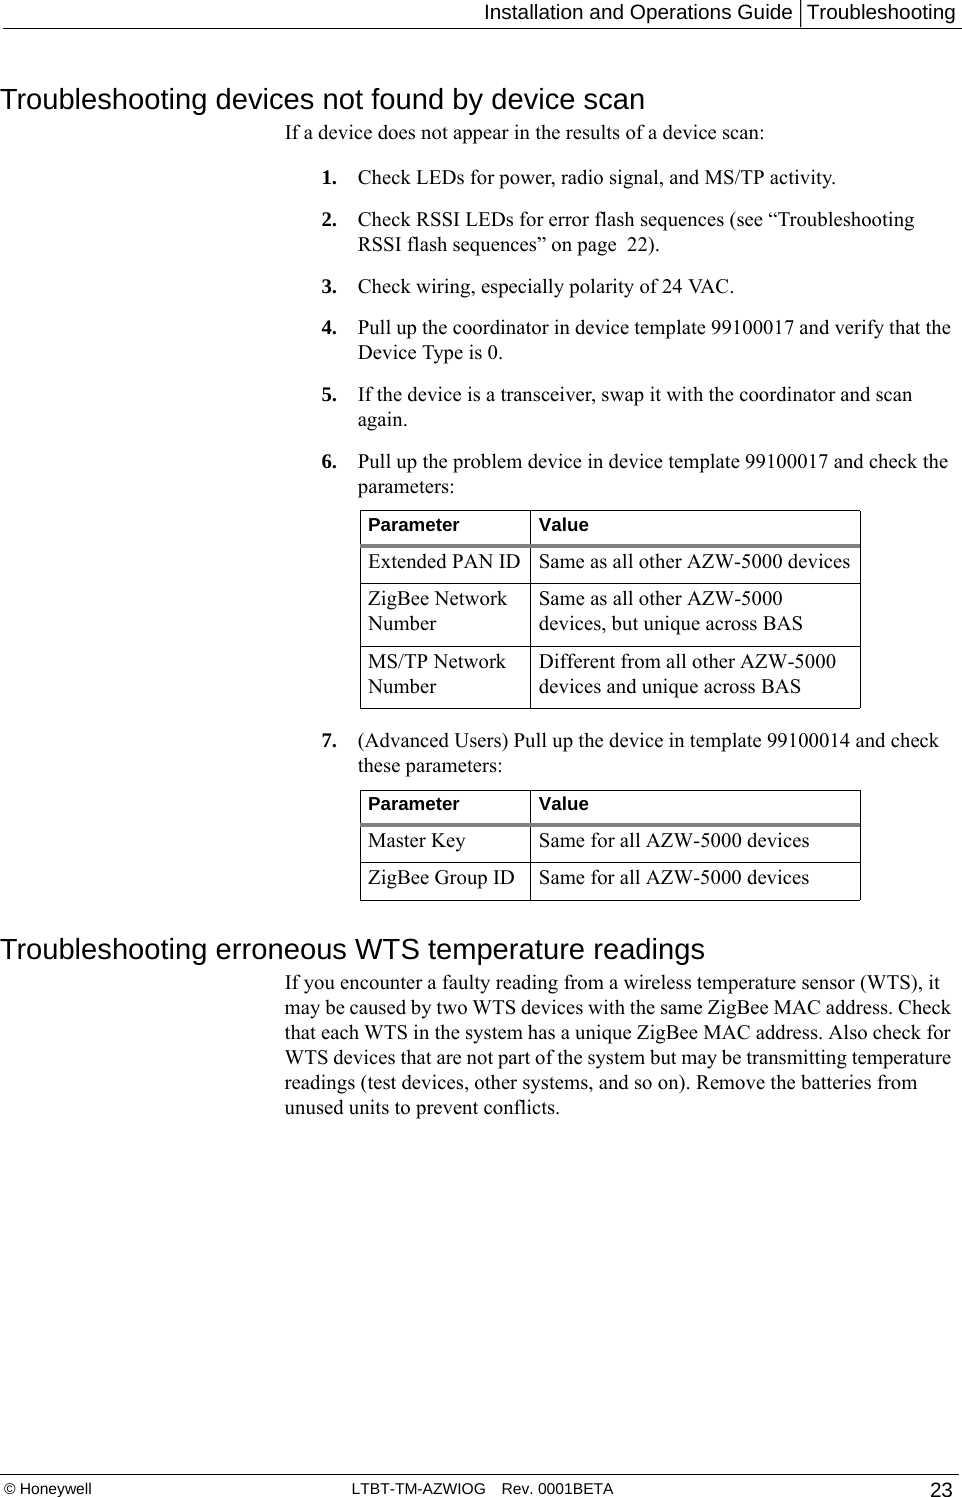  Installation and Operations Guide | Troubleshooting © Honeywell  LTBT-TM-AZWIOG Rev. 0001BETA   23 Troubleshooting devices not found by device scanIf a device does not appear in the results of a device scan:1. Check LEDs for power, radio signal, and MS/TP activity.2. Check RSSI LEDs for error flash sequences (see “Troubleshooting RSSI flash sequences” on page  22).3. Check wiring, especially polarity of 24 VAC.4. Pull up the coordinator in device template 99100017 and verify that the Device Type is 0.5. If the device is a transceiver, swap it with the coordinator and scan again.6. Pull up the problem device in device template 99100017 and check the parameters:7. (Advanced Users) Pull up the device in template 99100014 and check these parameters:Troubleshooting erroneous WTS temperature readingsIf you encounter a faulty reading from a wireless temperature sensor (WTS), it may be caused by two WTS devices with the same ZigBee MAC address. Check that each WTS in the system has a unique ZigBee MAC address. Also check for WTS devices that are not part of the system but may be transmitting temperature readings (test devices, other systems, and so on). Remove the batteries from unused units to prevent conflicts.Parameter ValueExtended PAN ID Same as all other AZW-5000 devicesZigBee Network NumberSame as all other AZW-5000 devices, but unique across BASMS/TP Network NumberDifferent from all other AZW-5000 devices and unique across BASParameter ValueMaster Key Same for all AZW-5000 devicesZigBee Group ID Same for all AZW-5000 devices